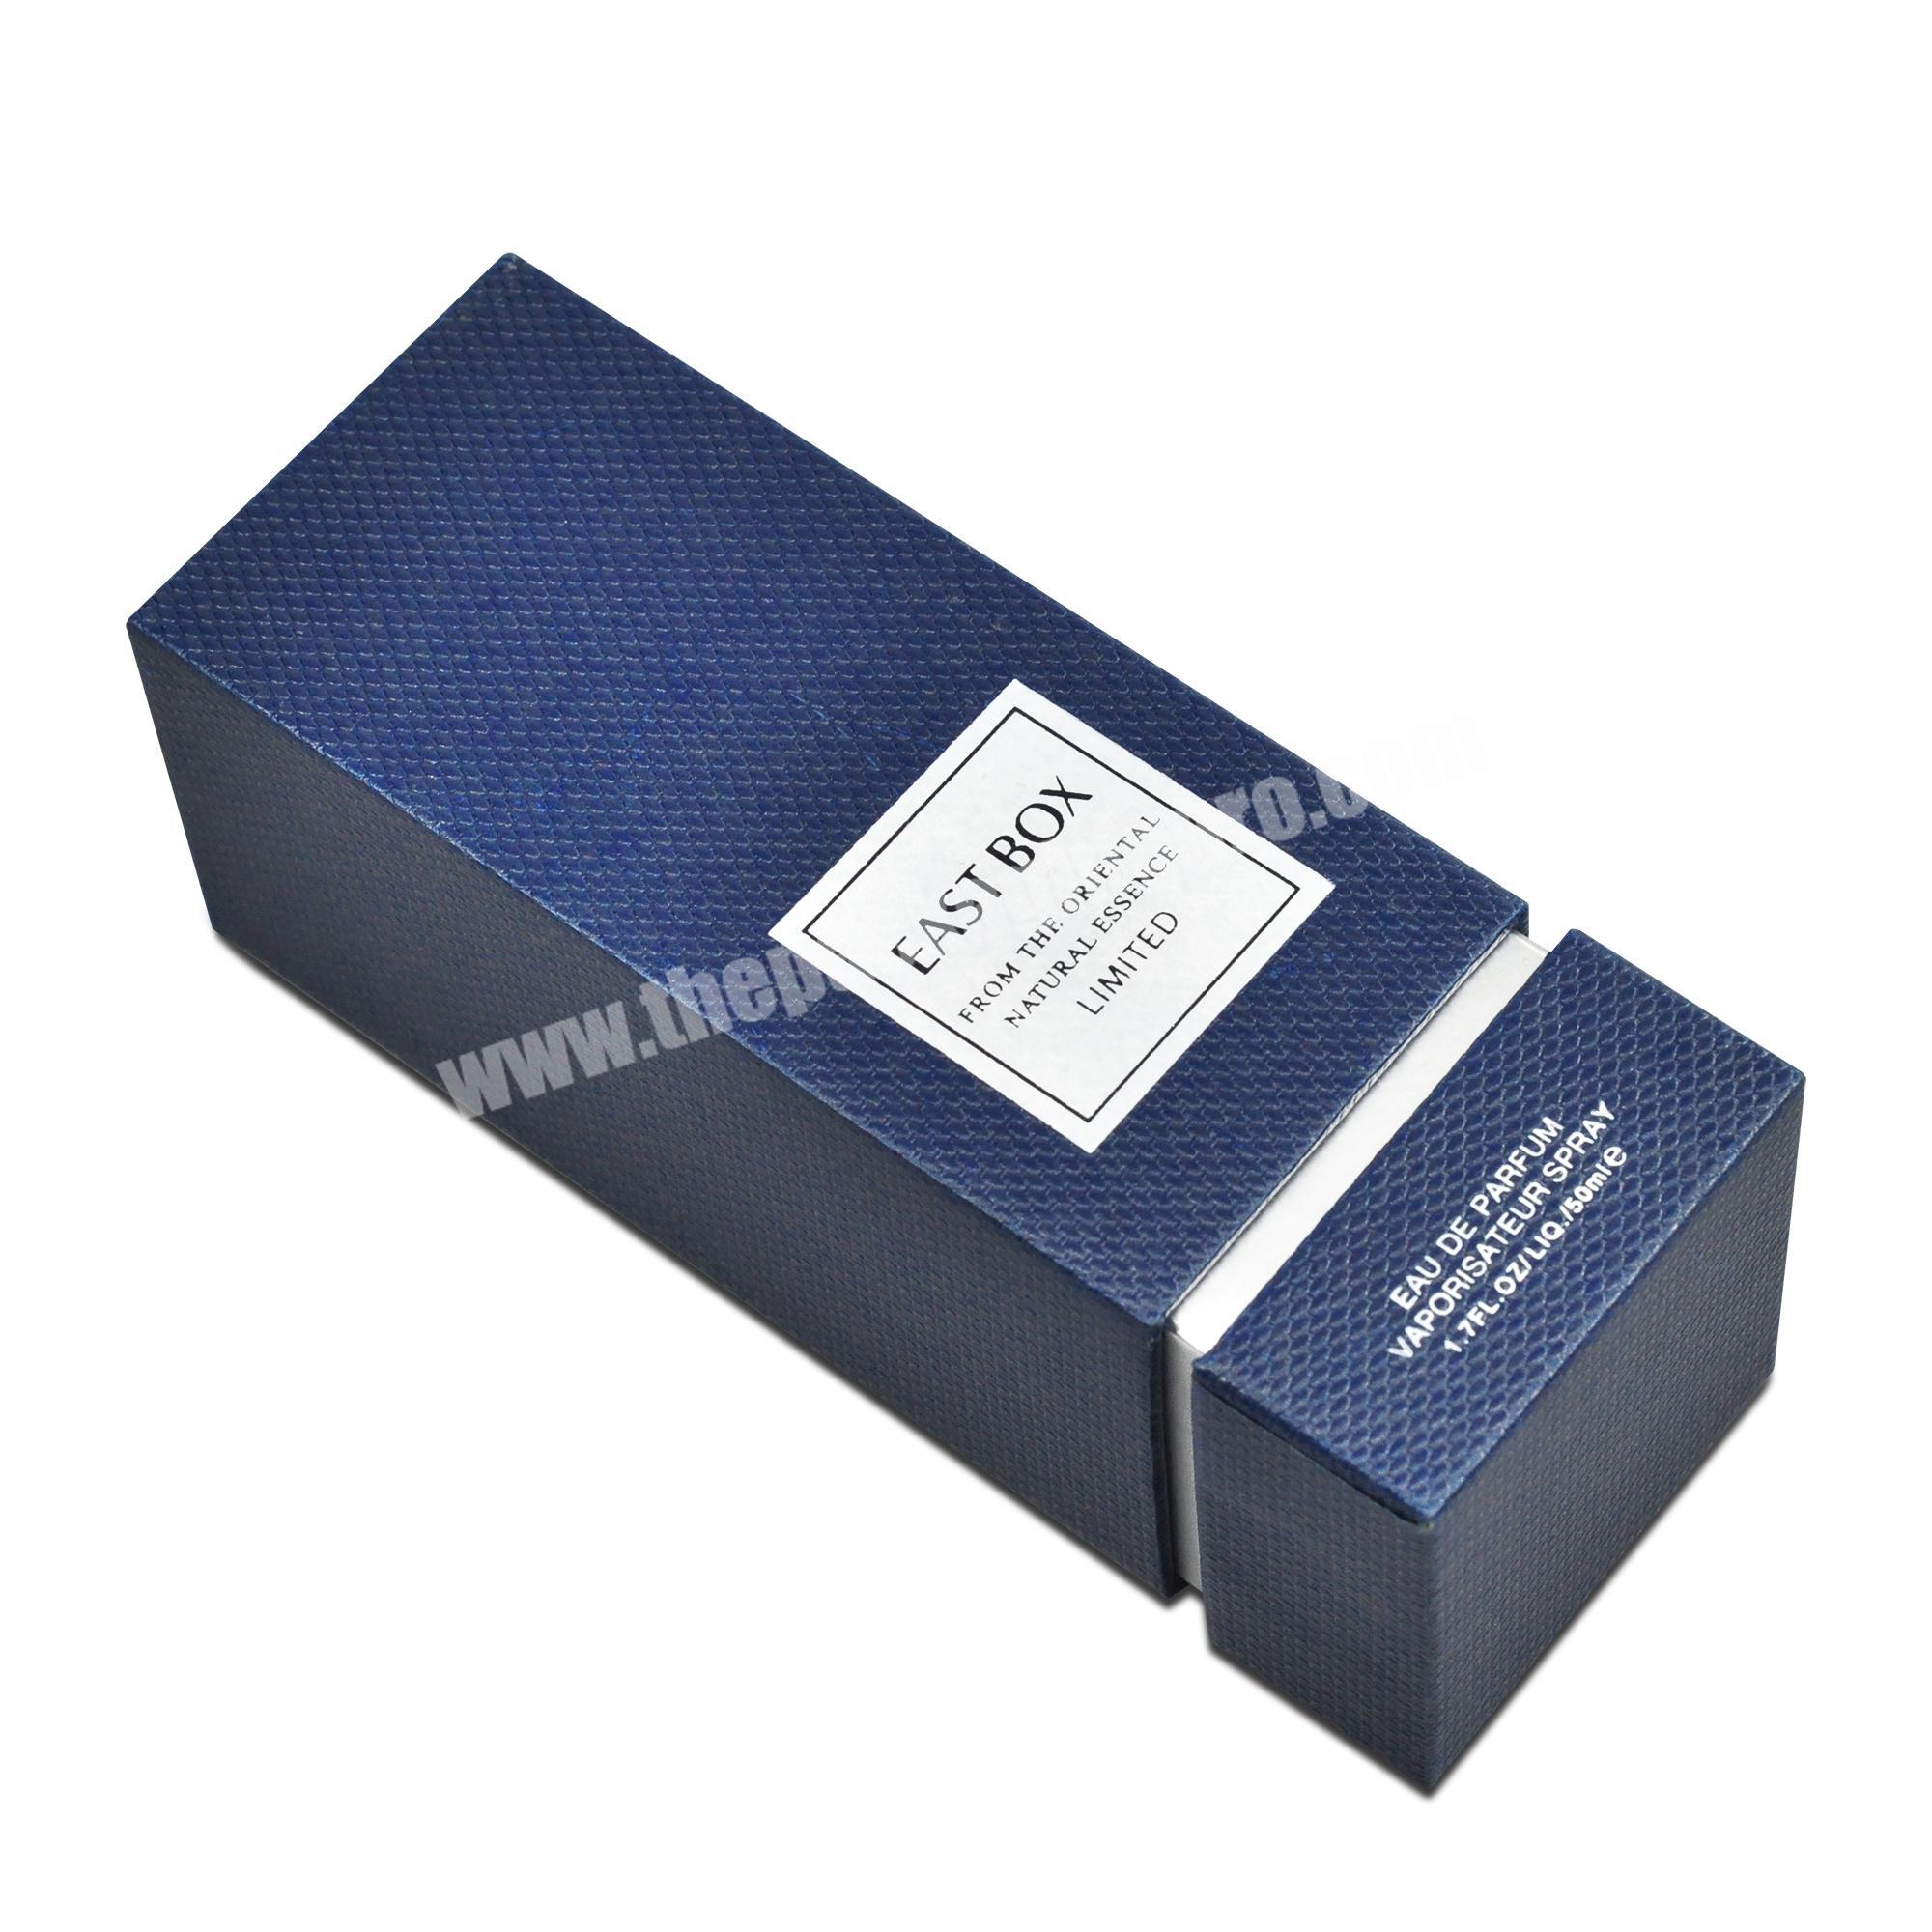 Wholesale Luxury Blue Color Bottle Box Corrugated Style Cosmetic Paper Box Gift Box for Liquor Beauty Packaging Art Paper Accept